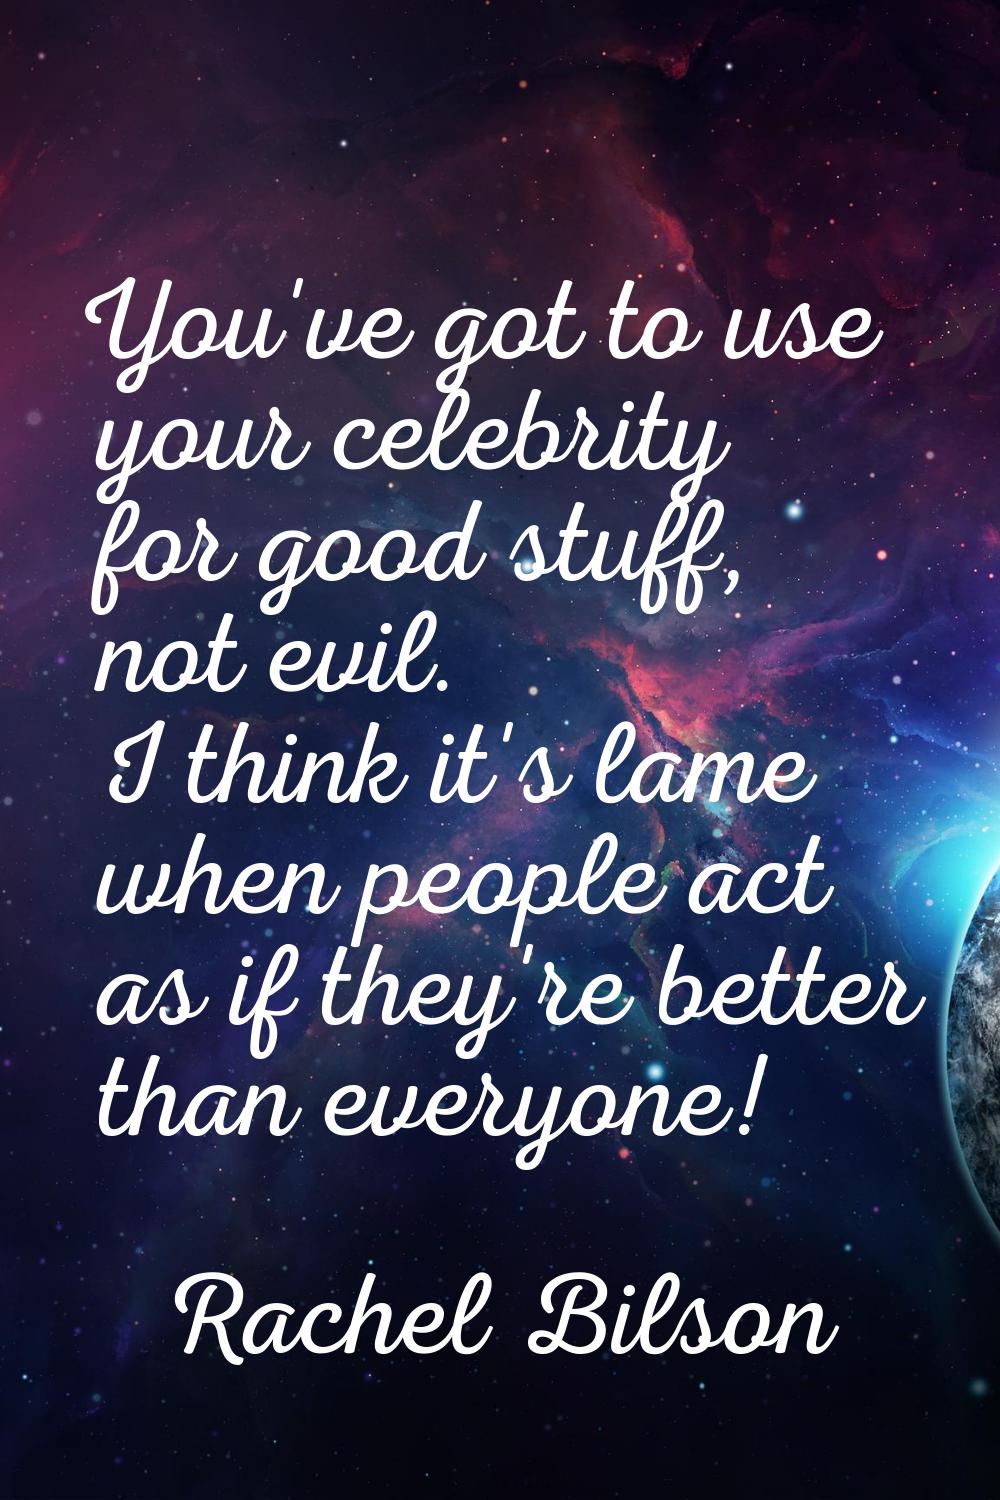 You've got to use your celebrity for good stuff, not evil. I think it's lame when people act as if 